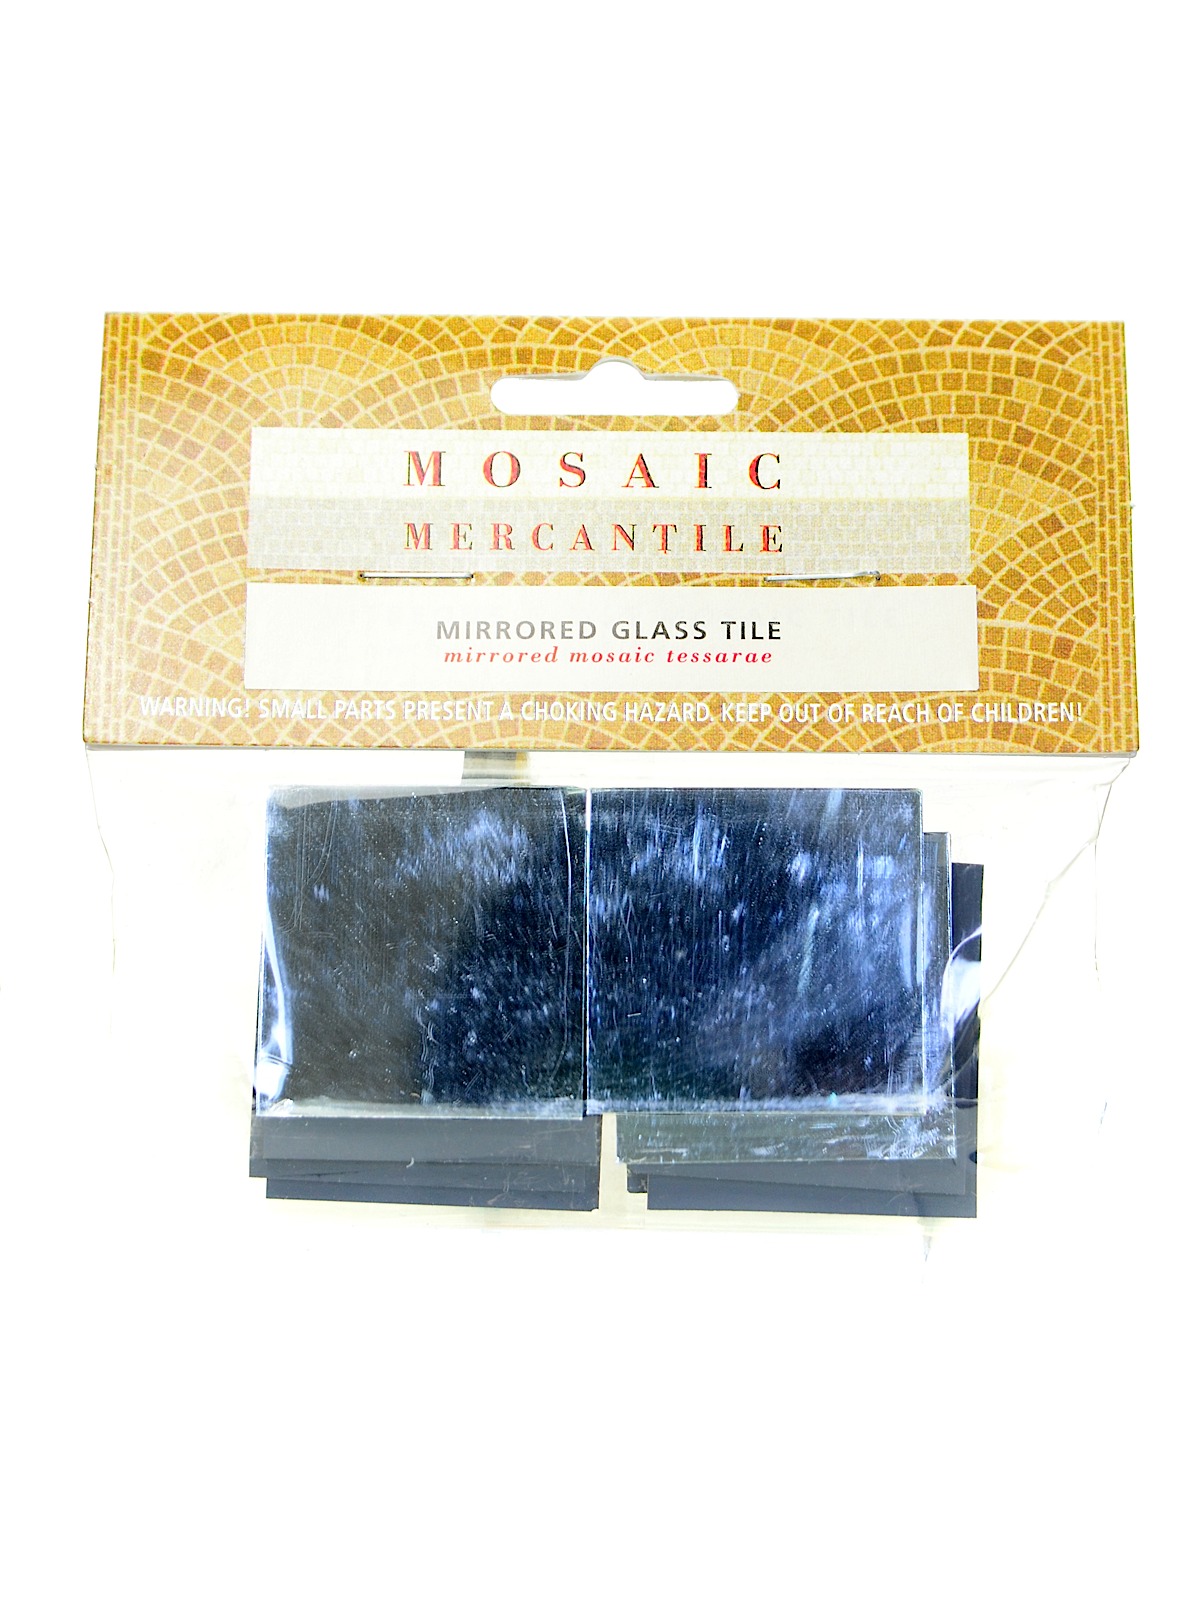 Mirrored Glass Tile Square 1 1 2 In. 10 Tiles Bag